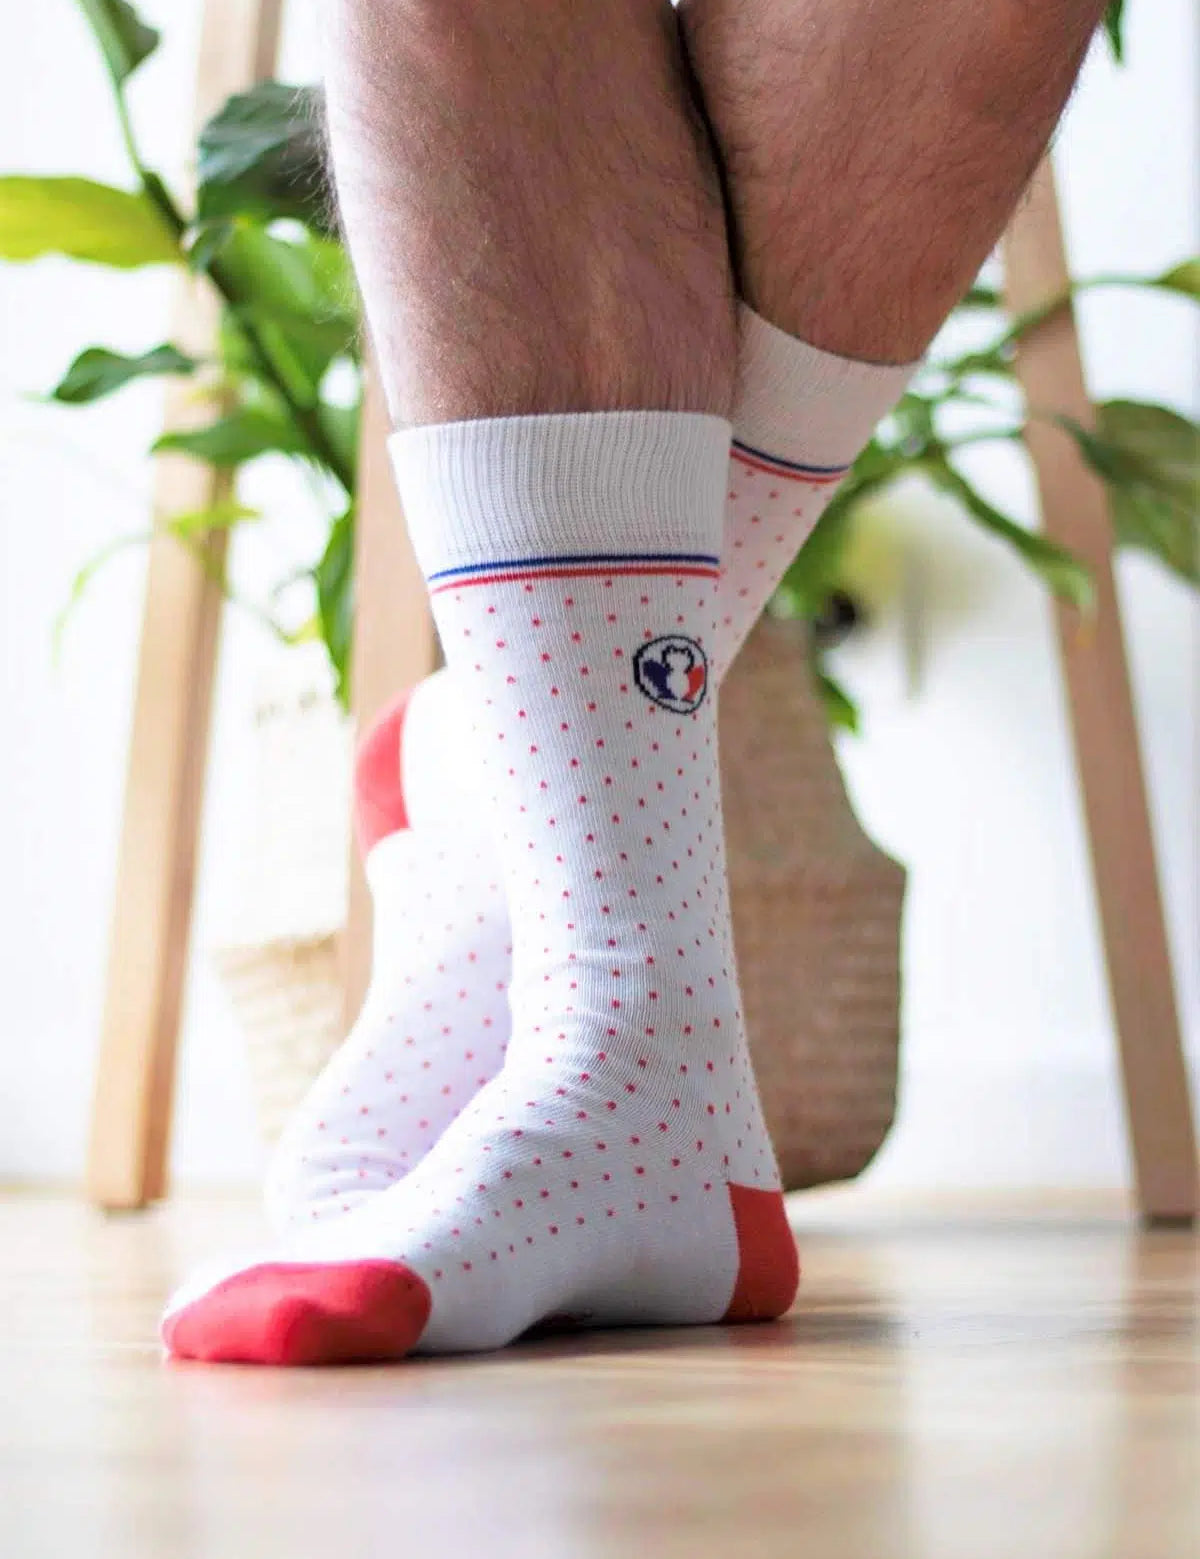 chaussettes-made-in-france-tranquille-emile-les-pois-blanc-rouge-2-2_jpg.webp